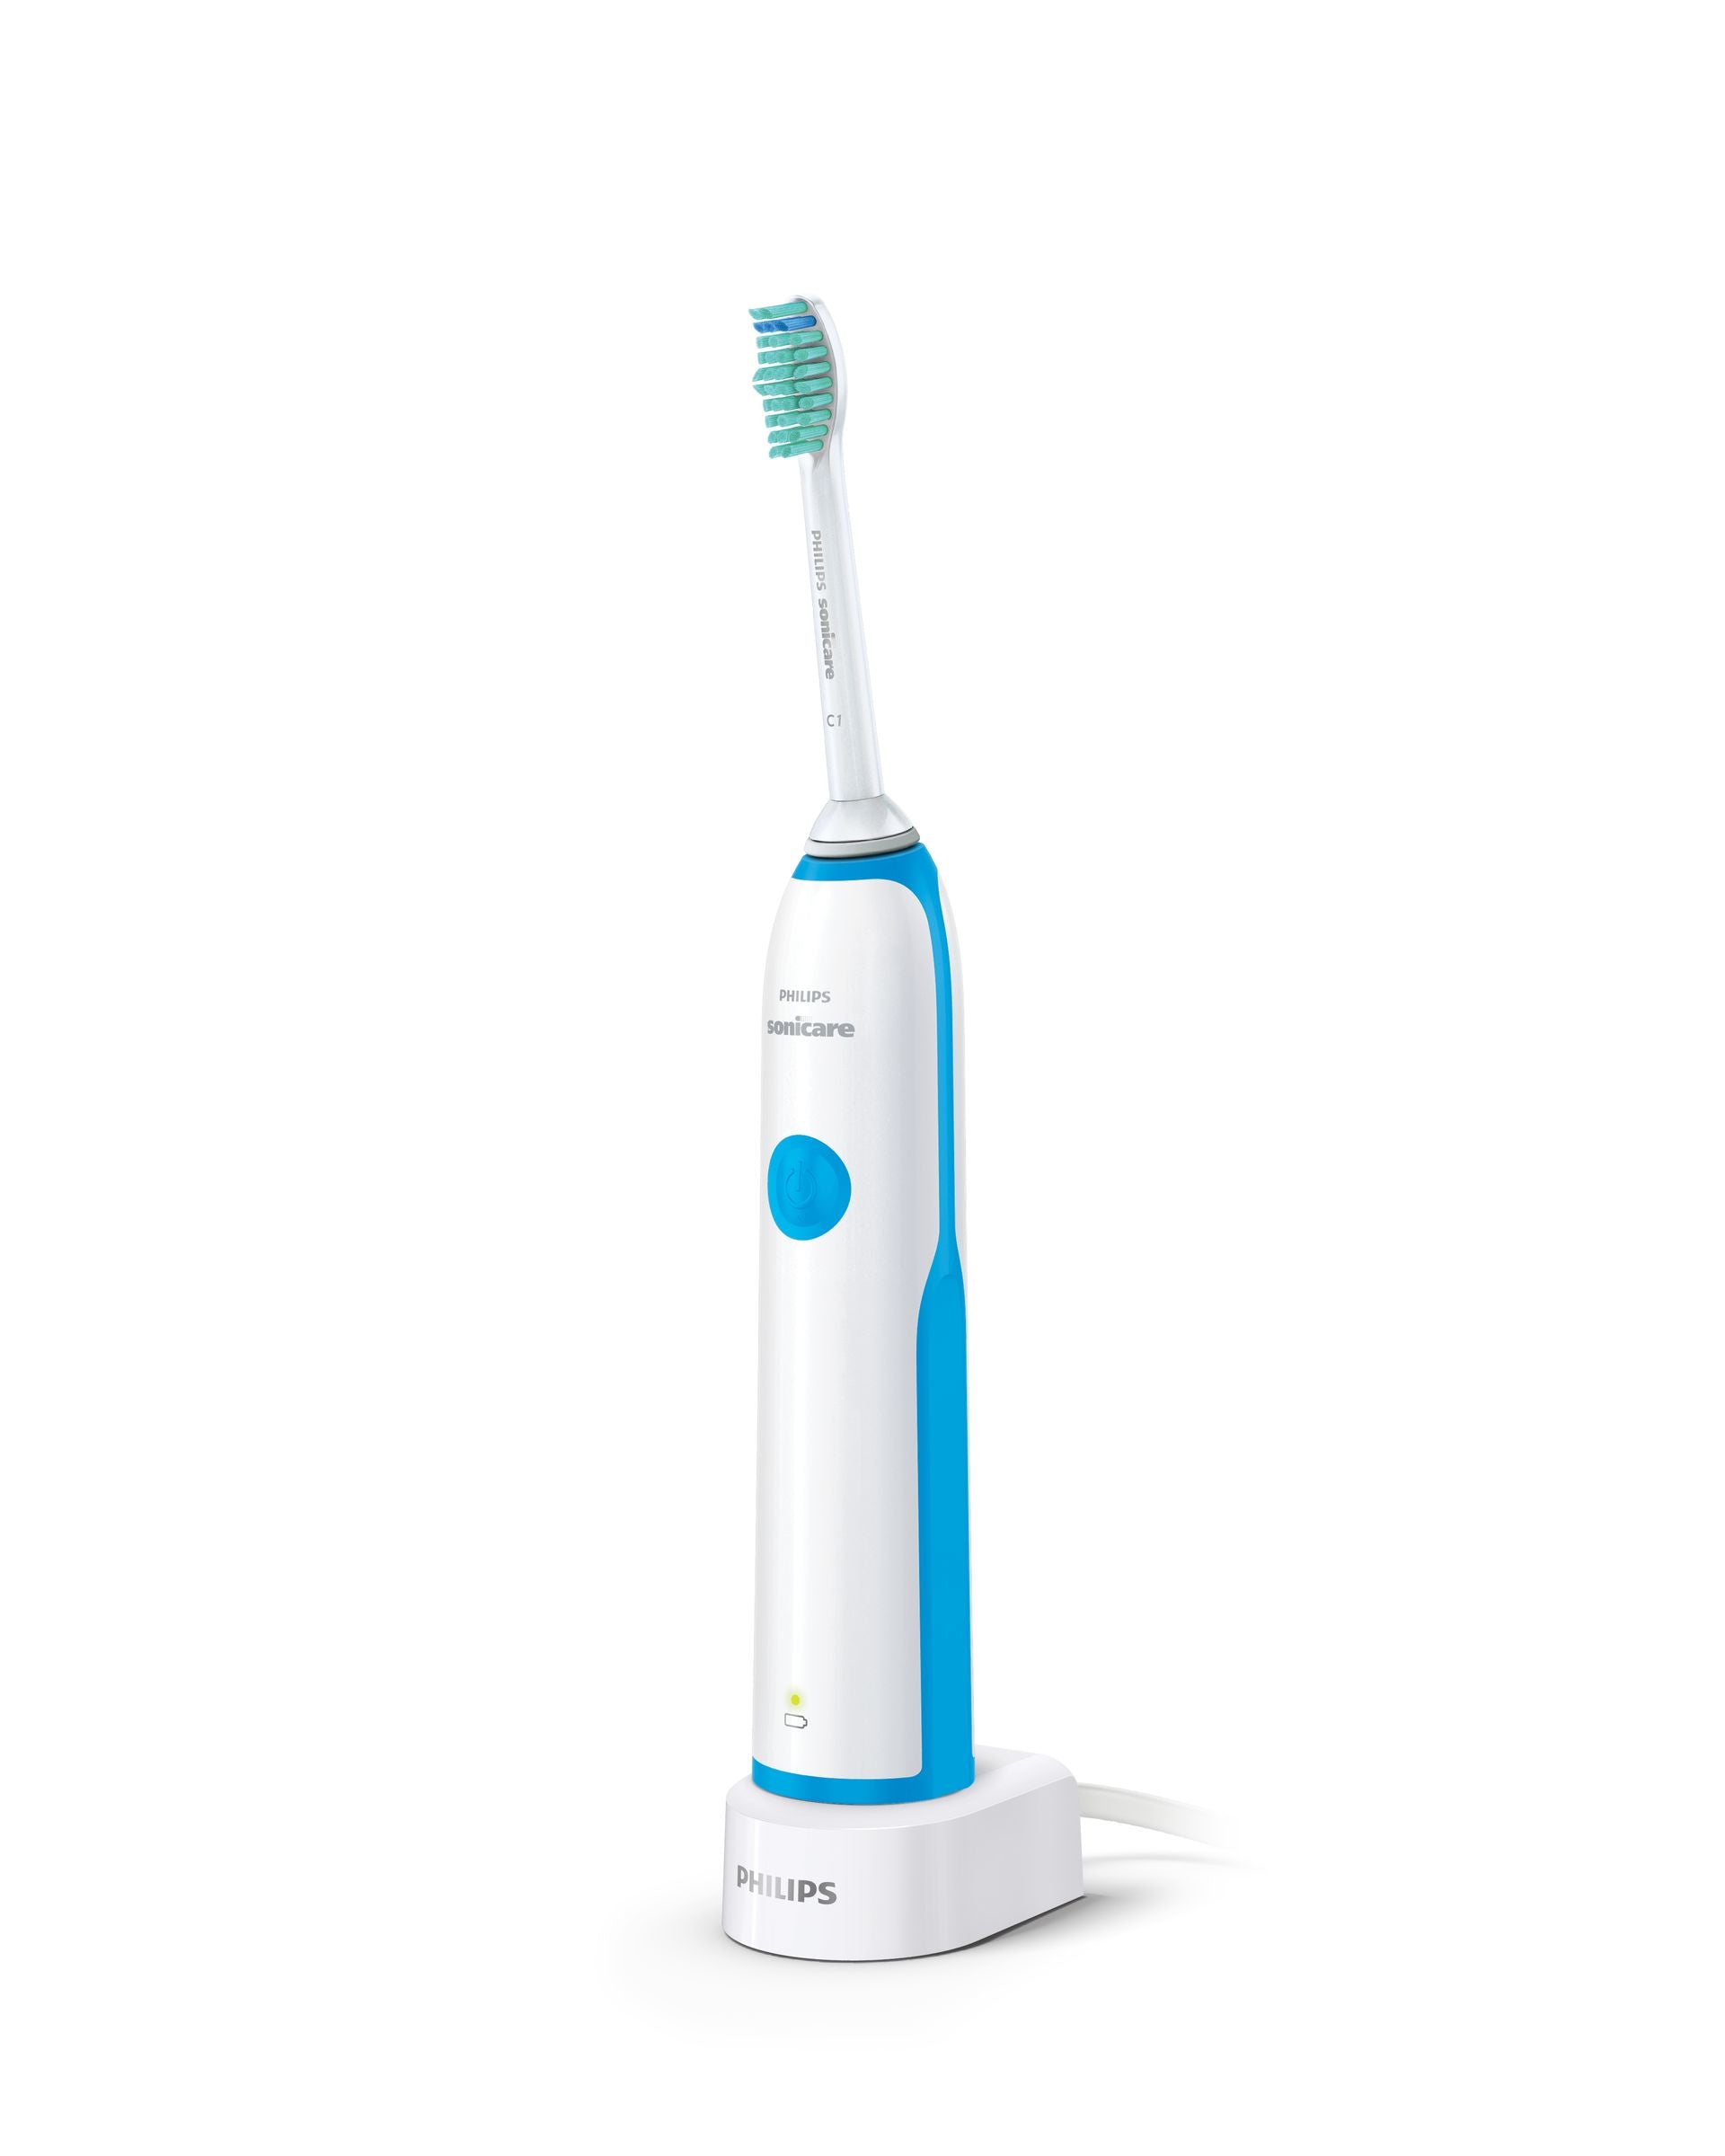 Philips Sonicare Electric Toothbrush at Best Price - Halabh